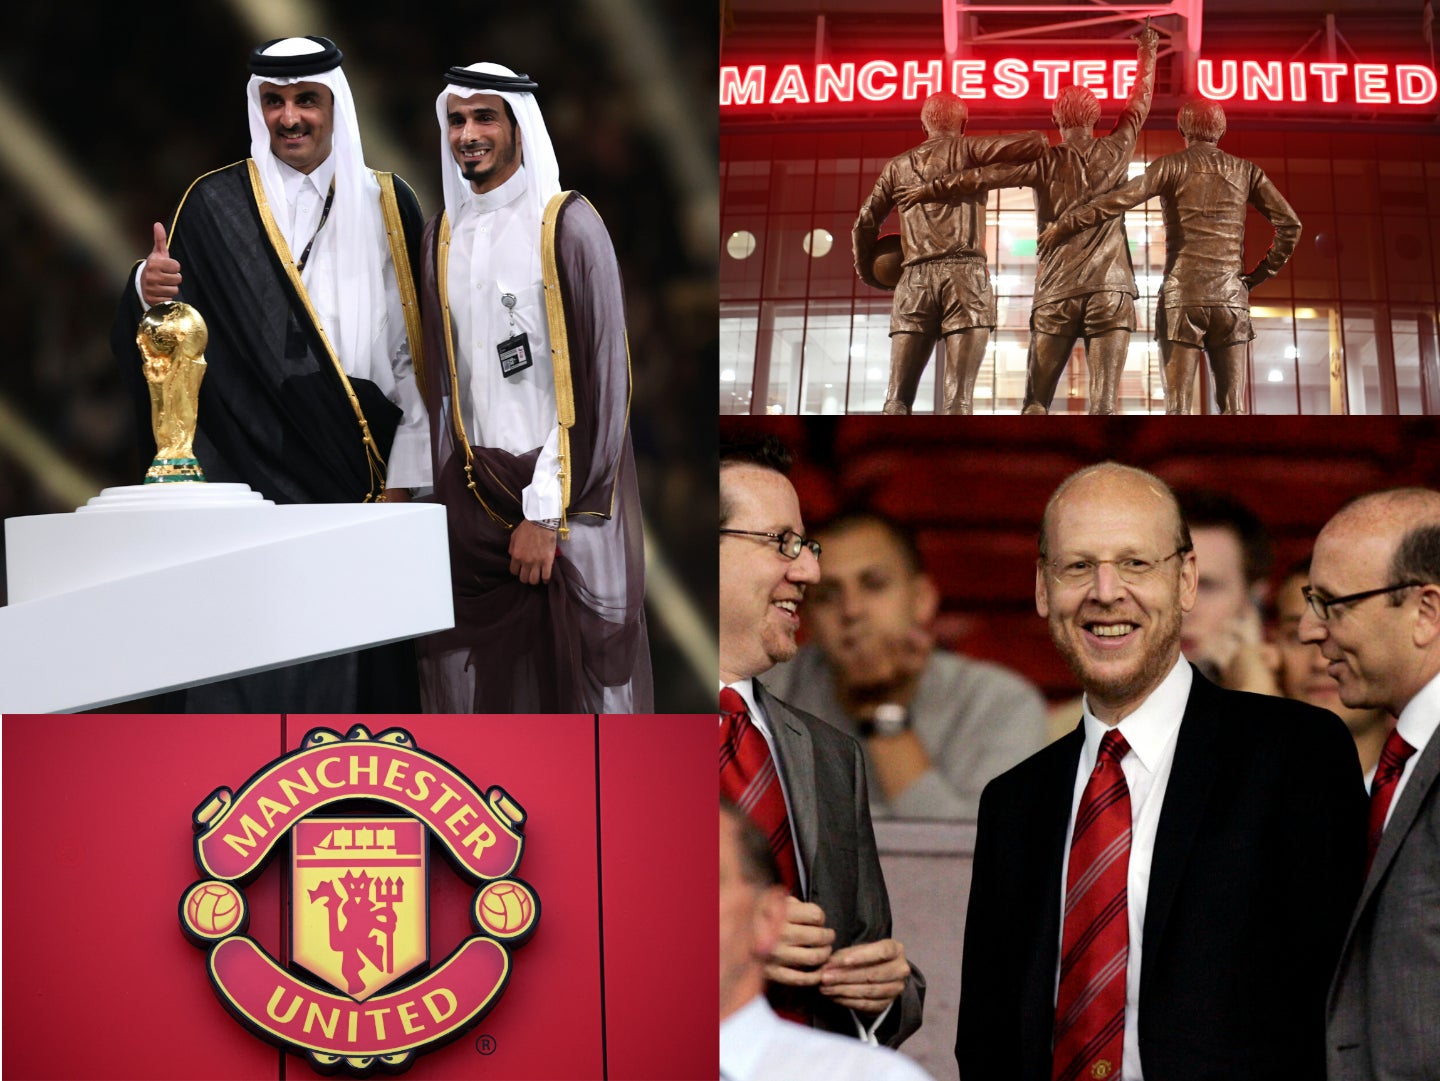 Qatar are rumoured to be interested in completing a takeover of Manchester United from the Glazer family